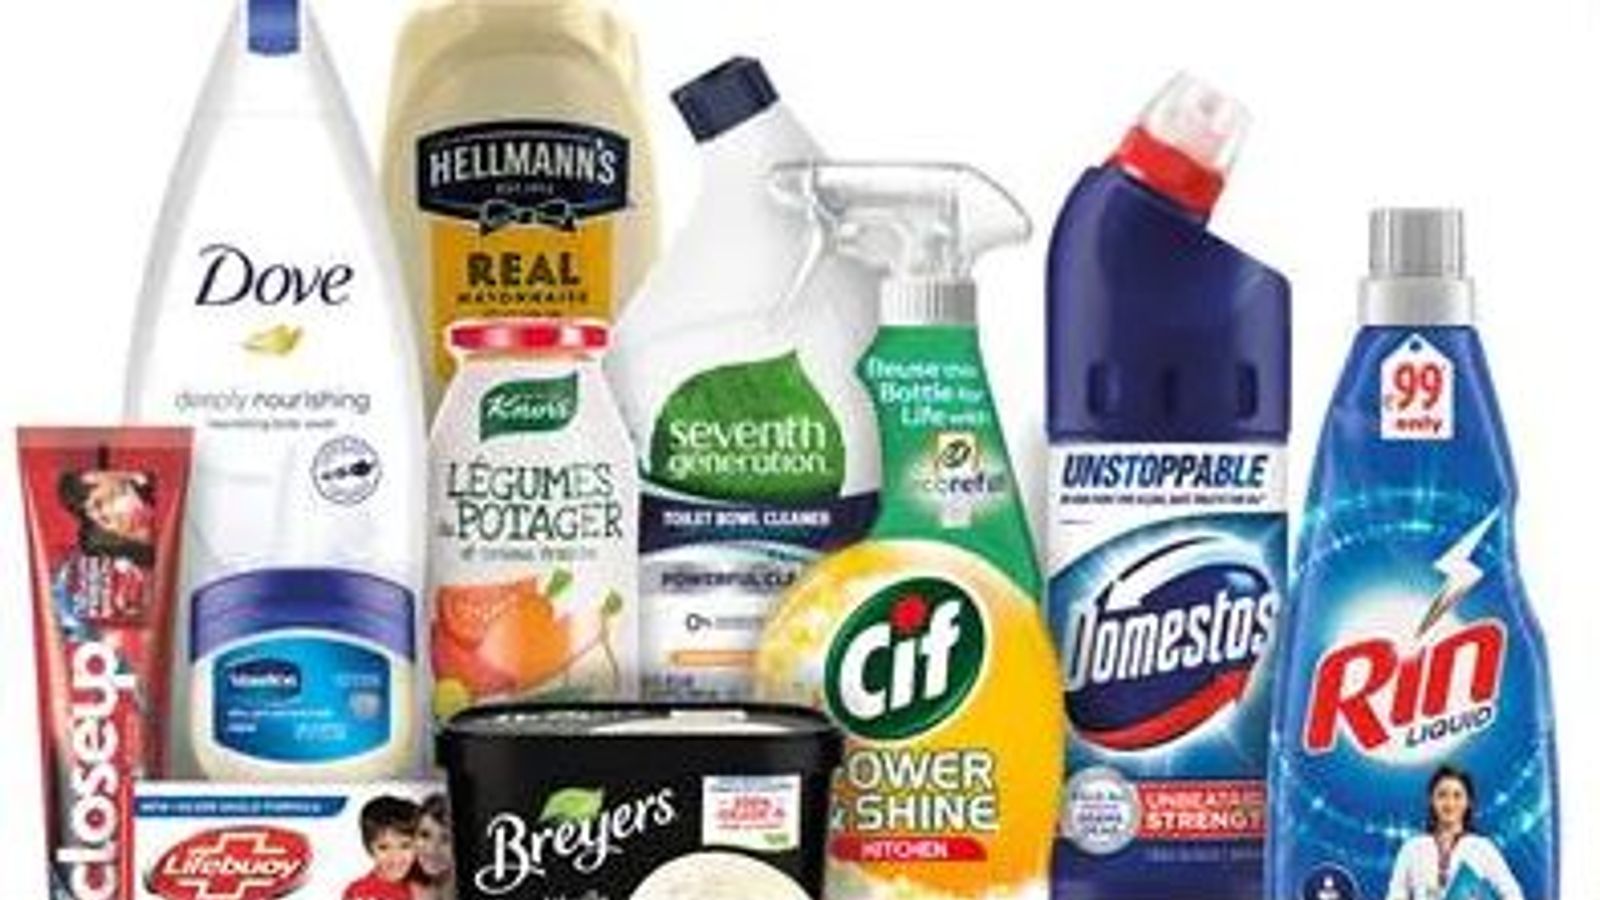 Cost of living: Consumer goods giant Unilever expects price growth throughout 2023